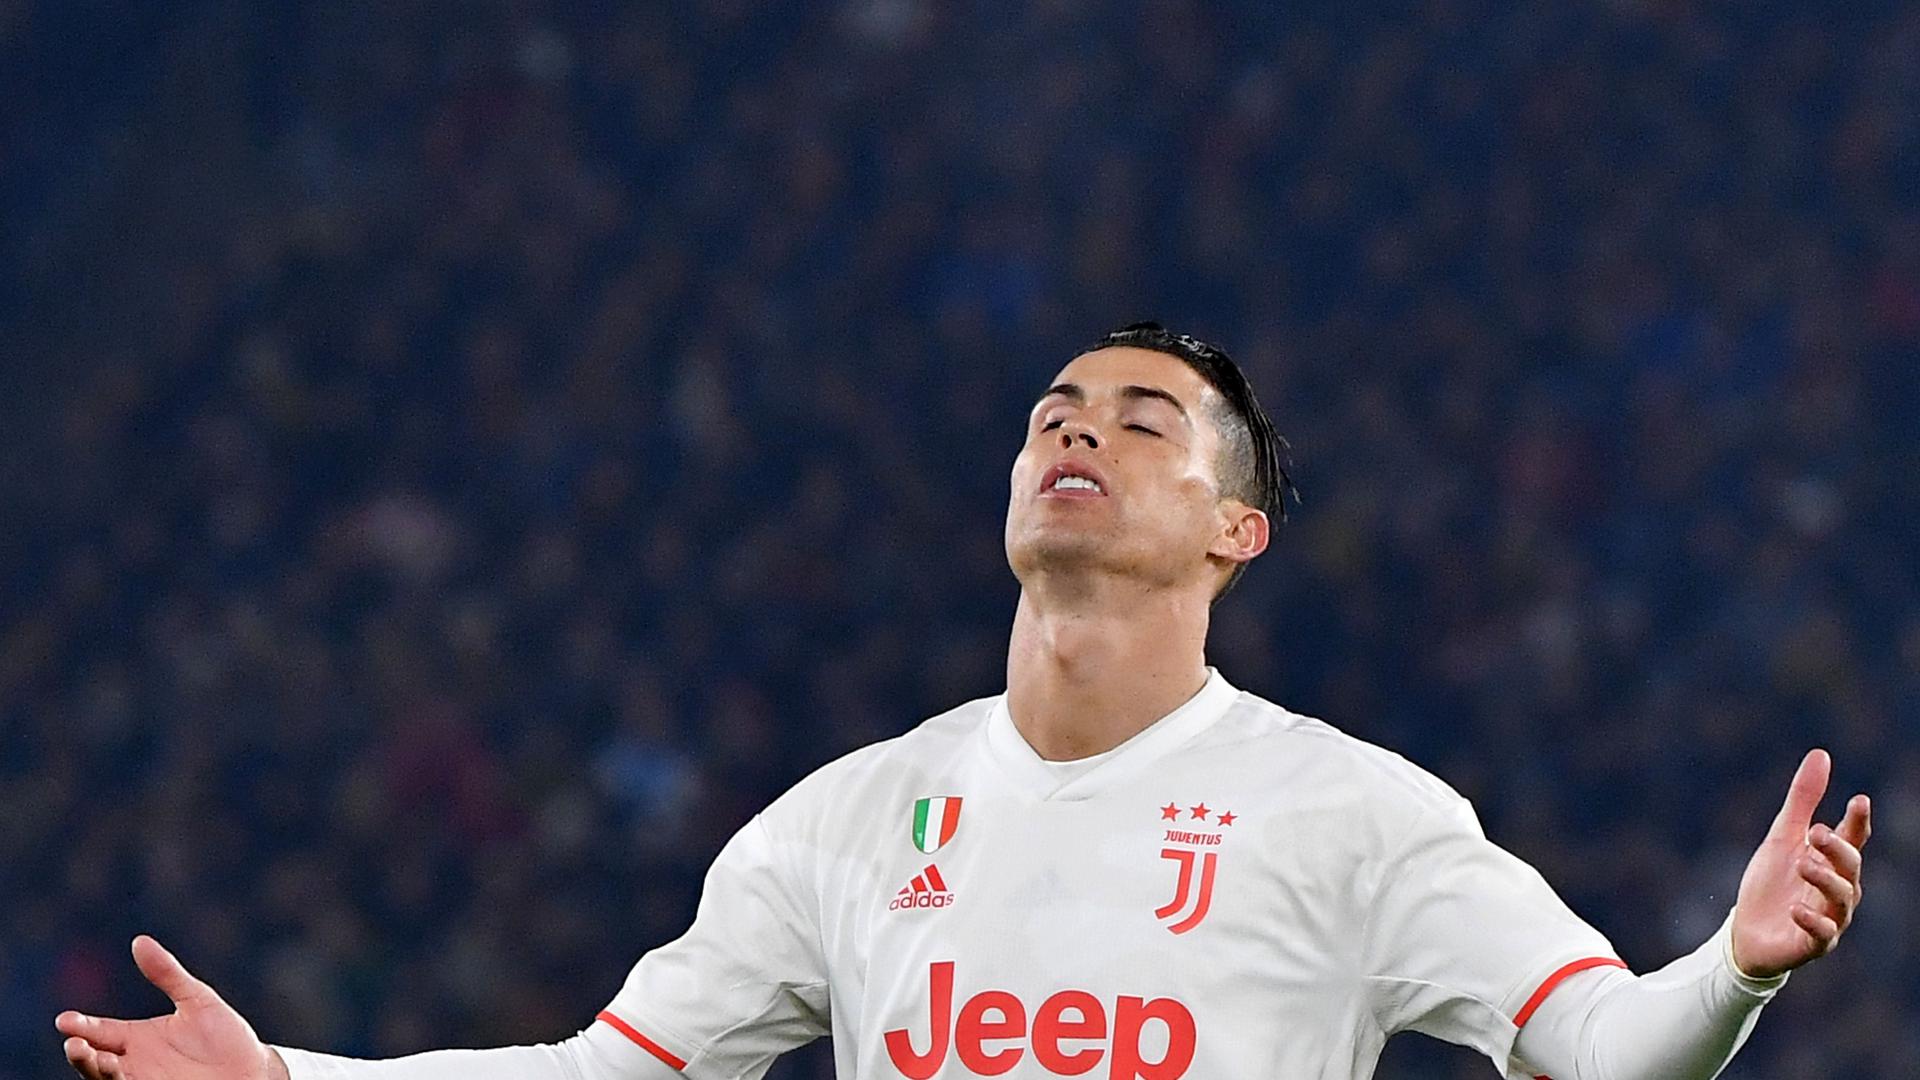 Juventus' Portuguese forward Cristiano Ronaldo reacts during the Italian Serie A football match AS Roma vs Juventus on January 12, 2020 at the Olympic stadium in Rome. (Photo by Andreas SOLARO / AFP)